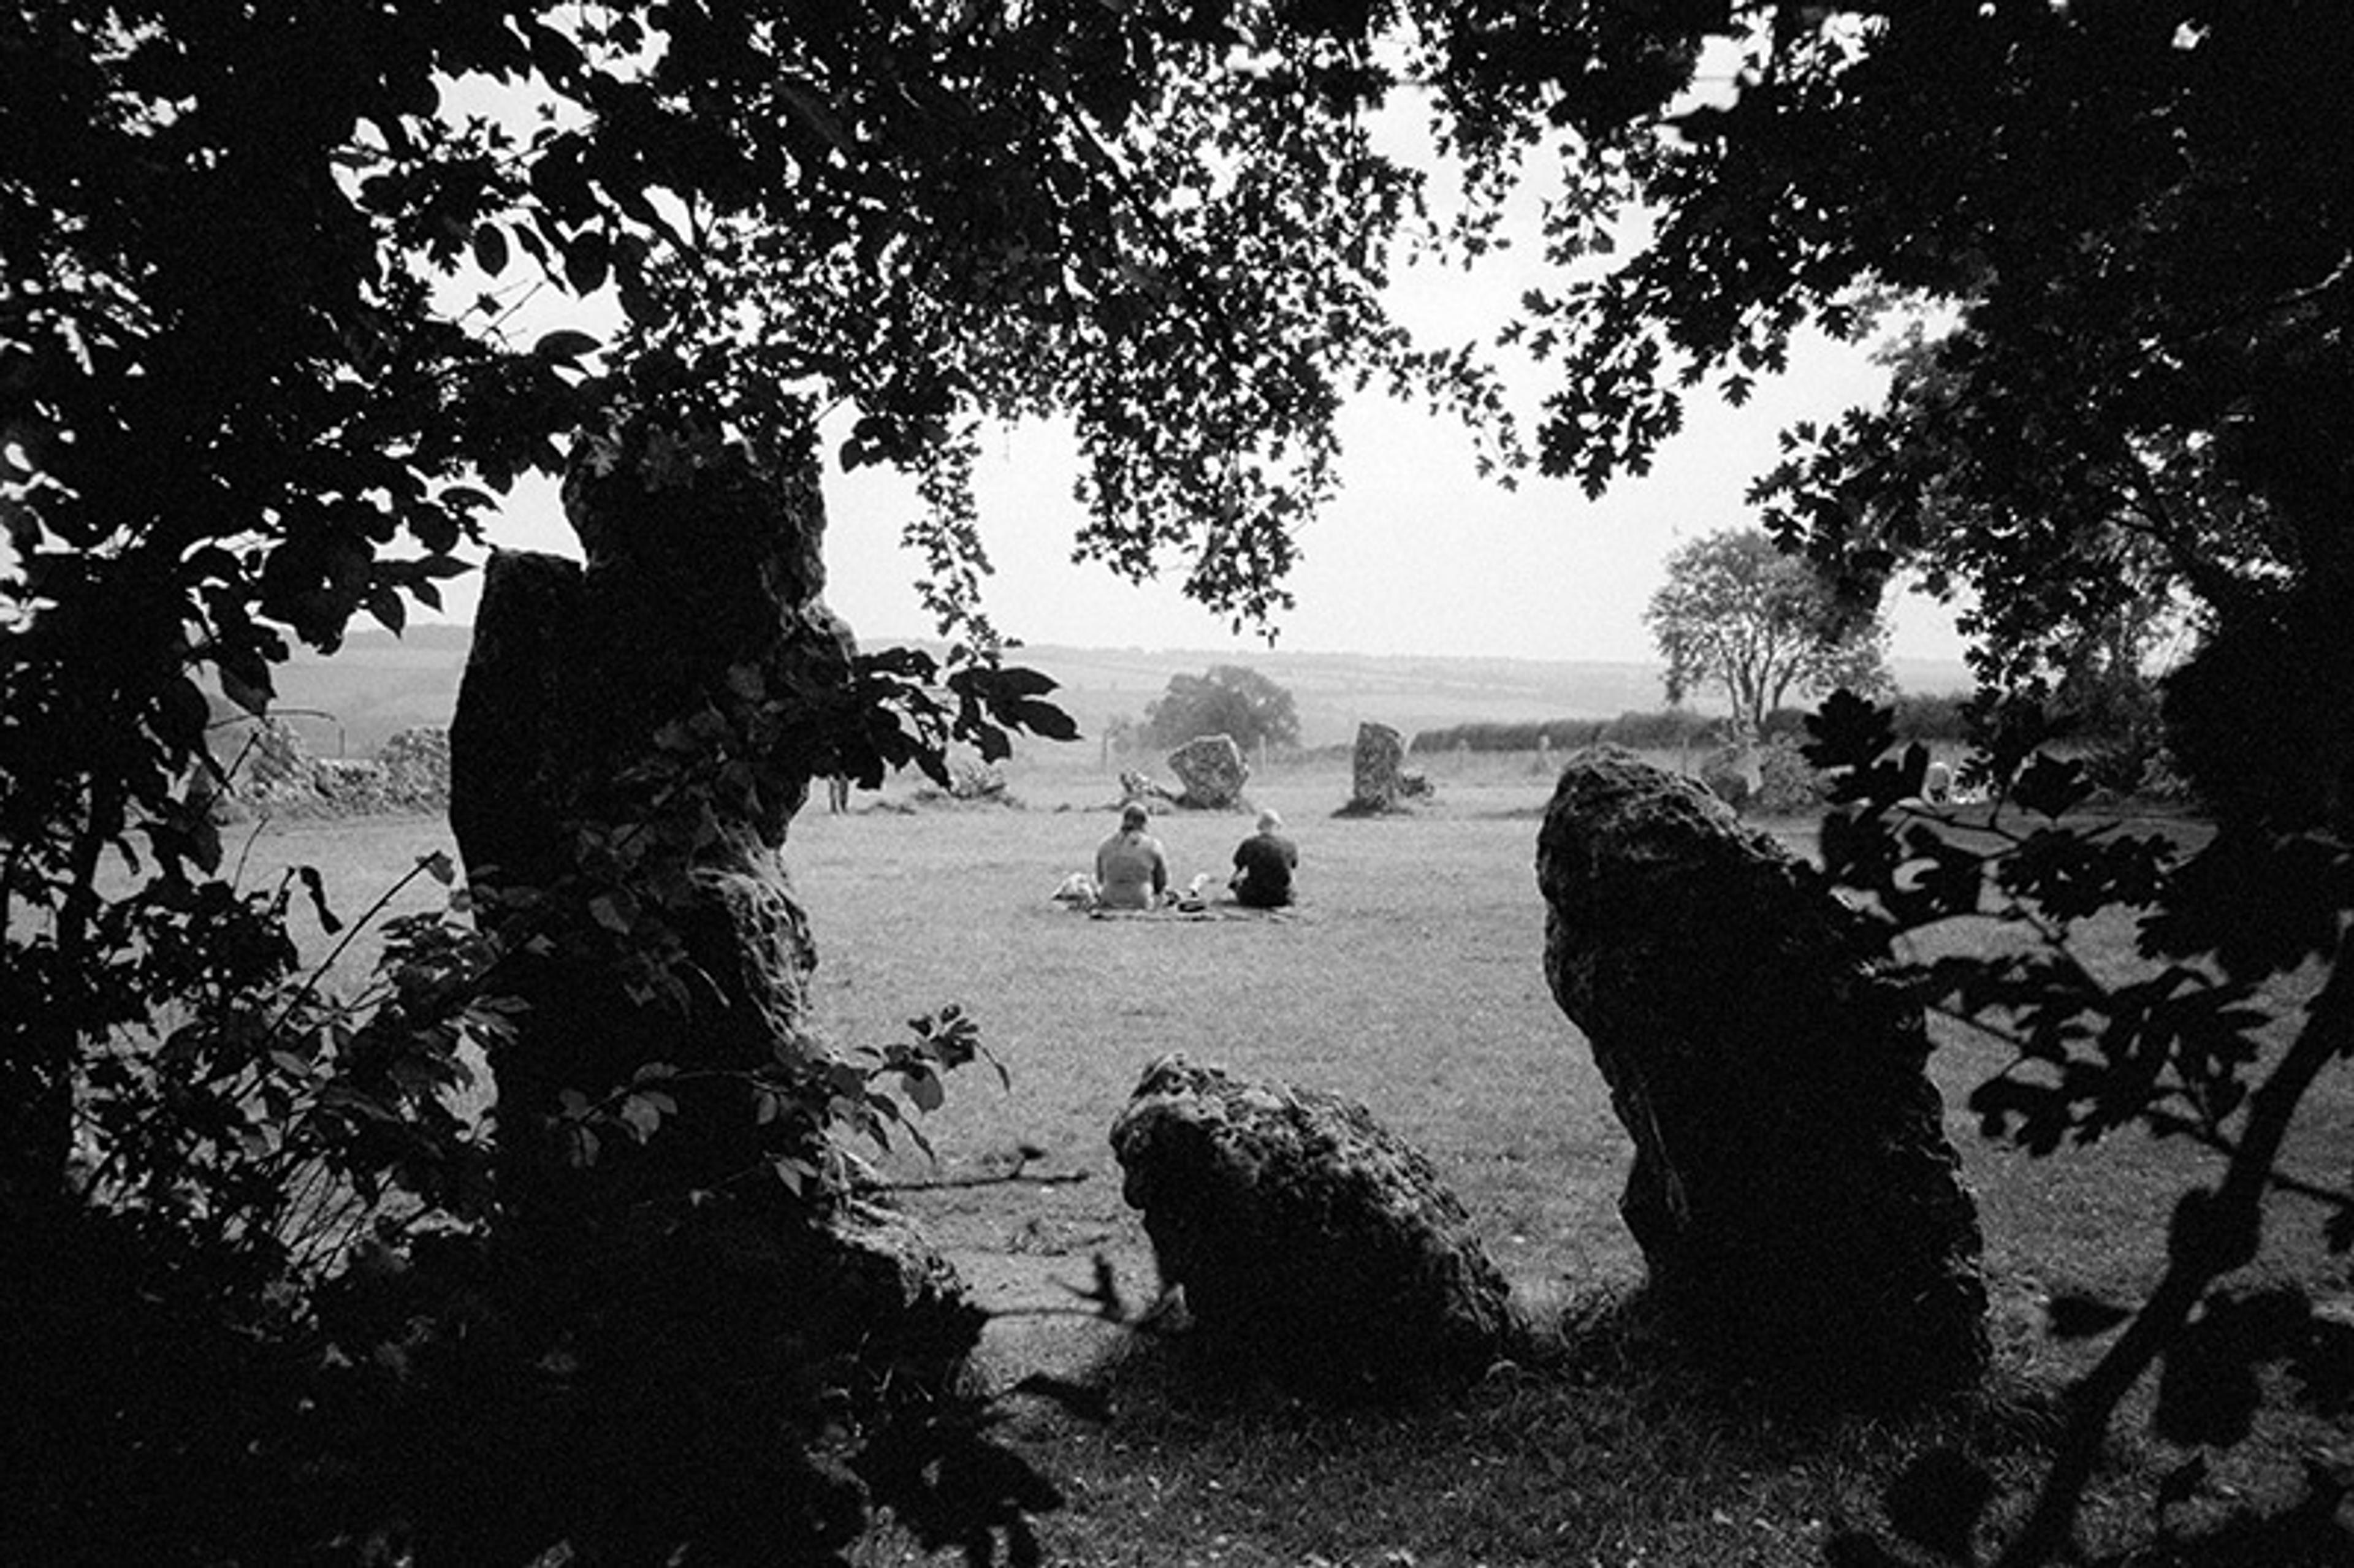 A black-and-white image of a couple seated in the centre of an ancient stone circle. The image is shot through dark foliage such that the foreground frames the couple